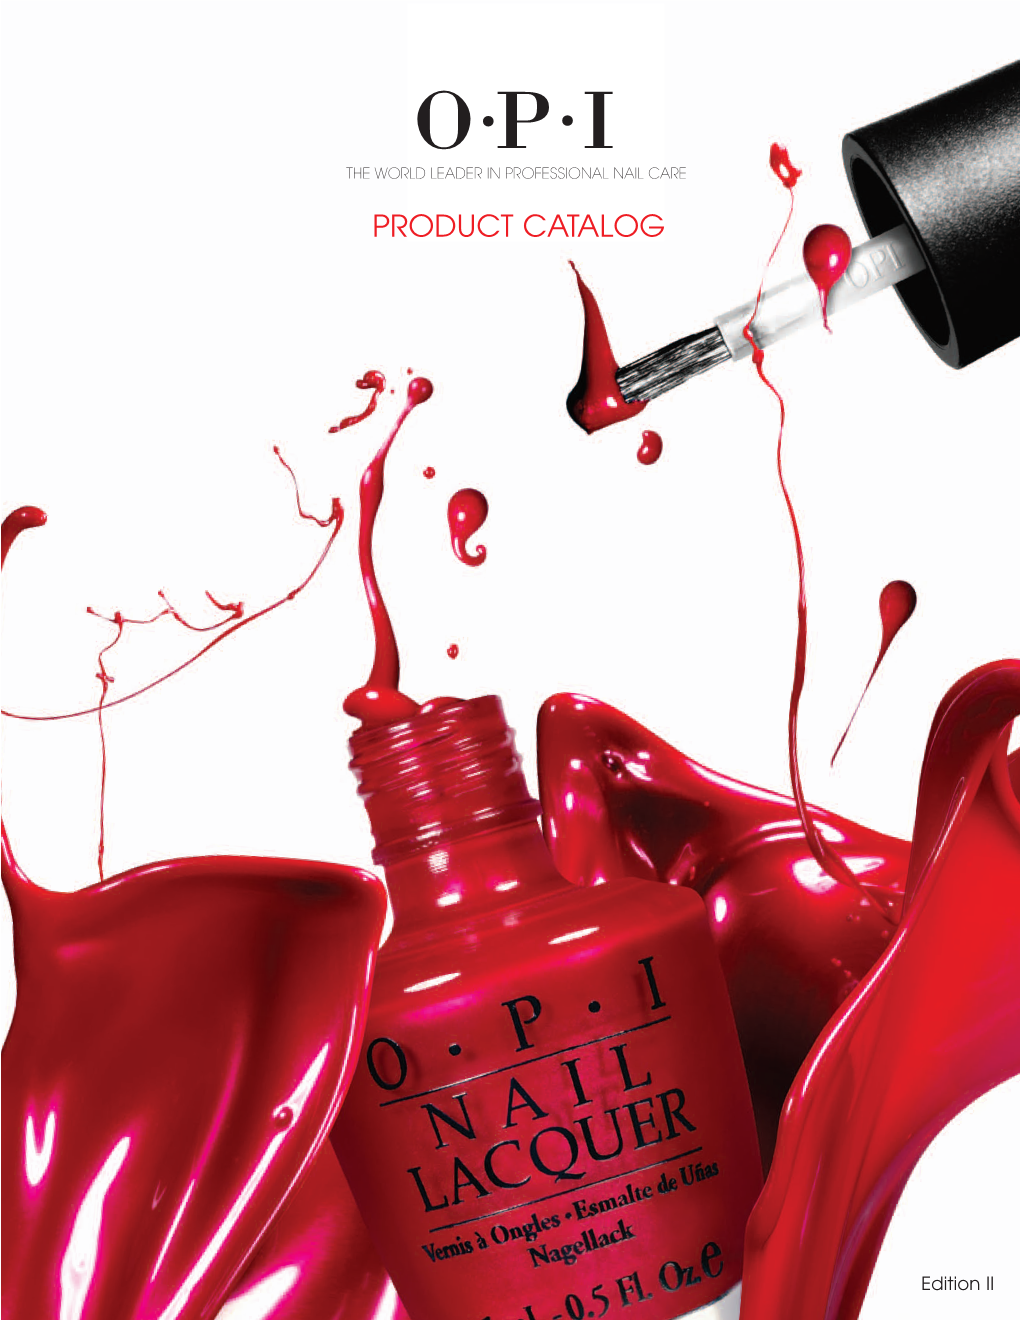 Product Catalog Product the World Leader in Professionalworld Nail Care The